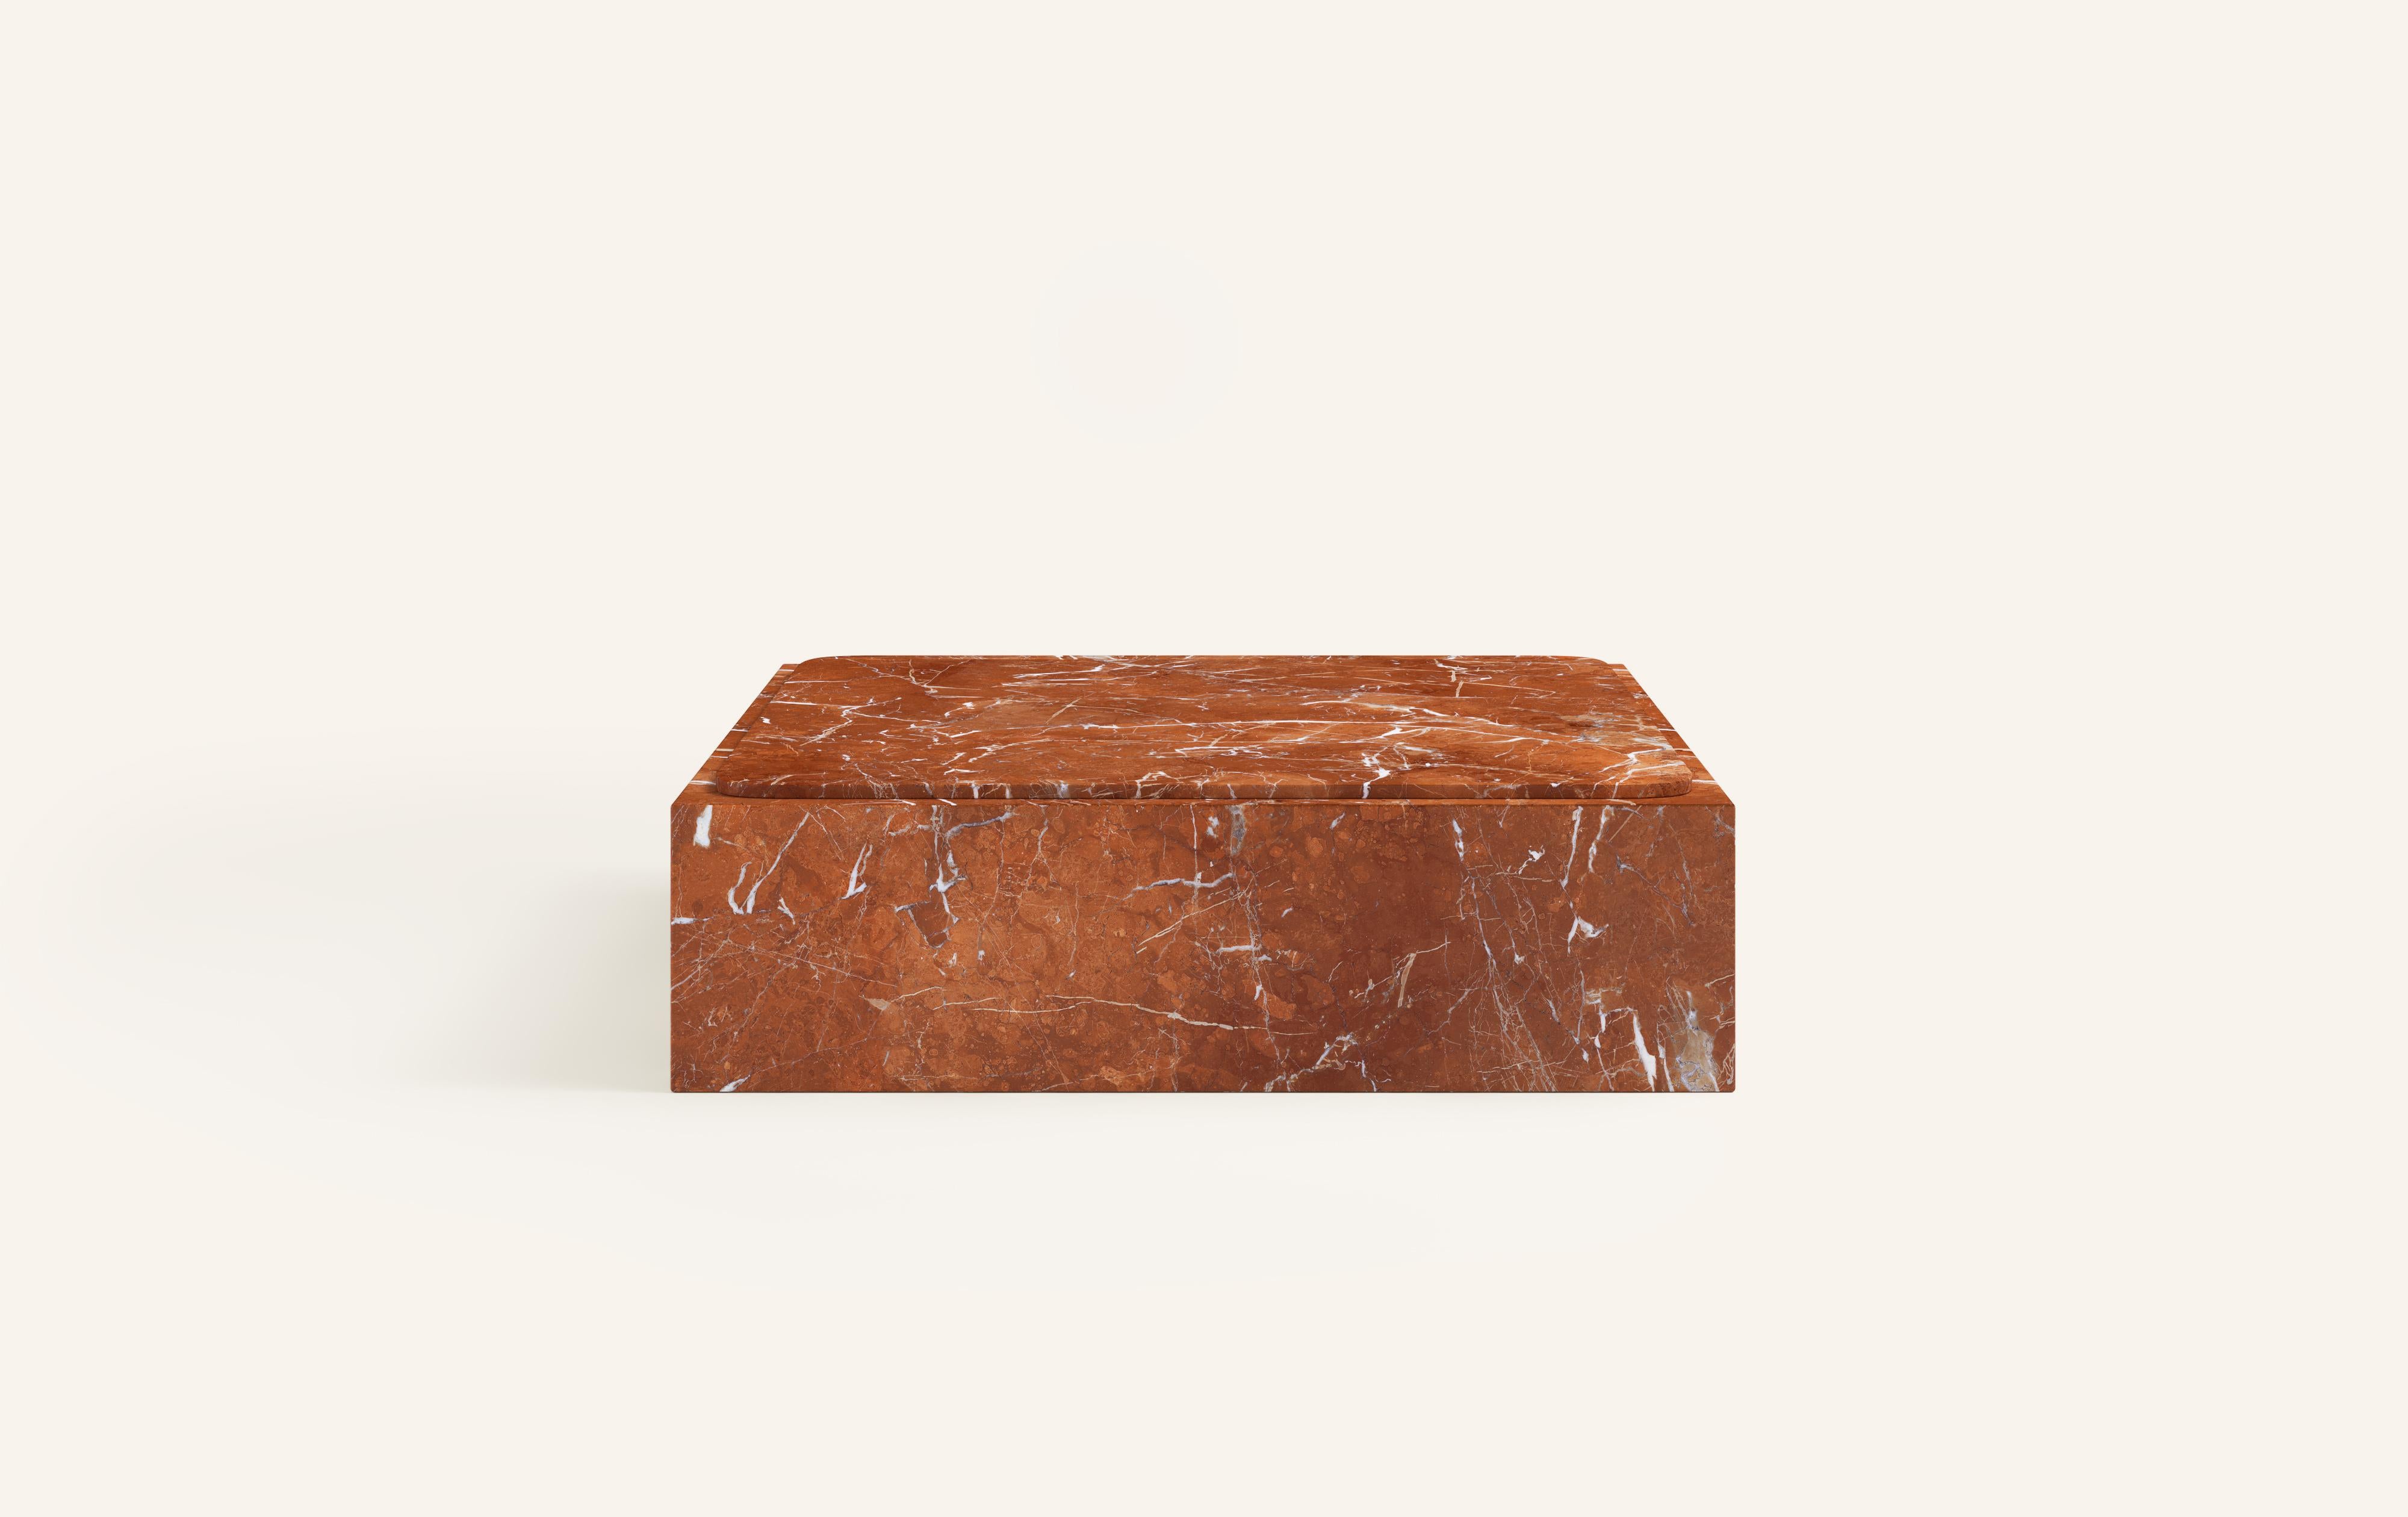 MONOLITHIC FORMS SOFTENED BY GENTLE EDGES. WITH ITS BOLD MARBLE PATTERNS CUBO IS AS VERSATILE AS IT IS STRIKING.

DIMENSIONS:
60”L x 60”W x 13”H: 
- 3/4